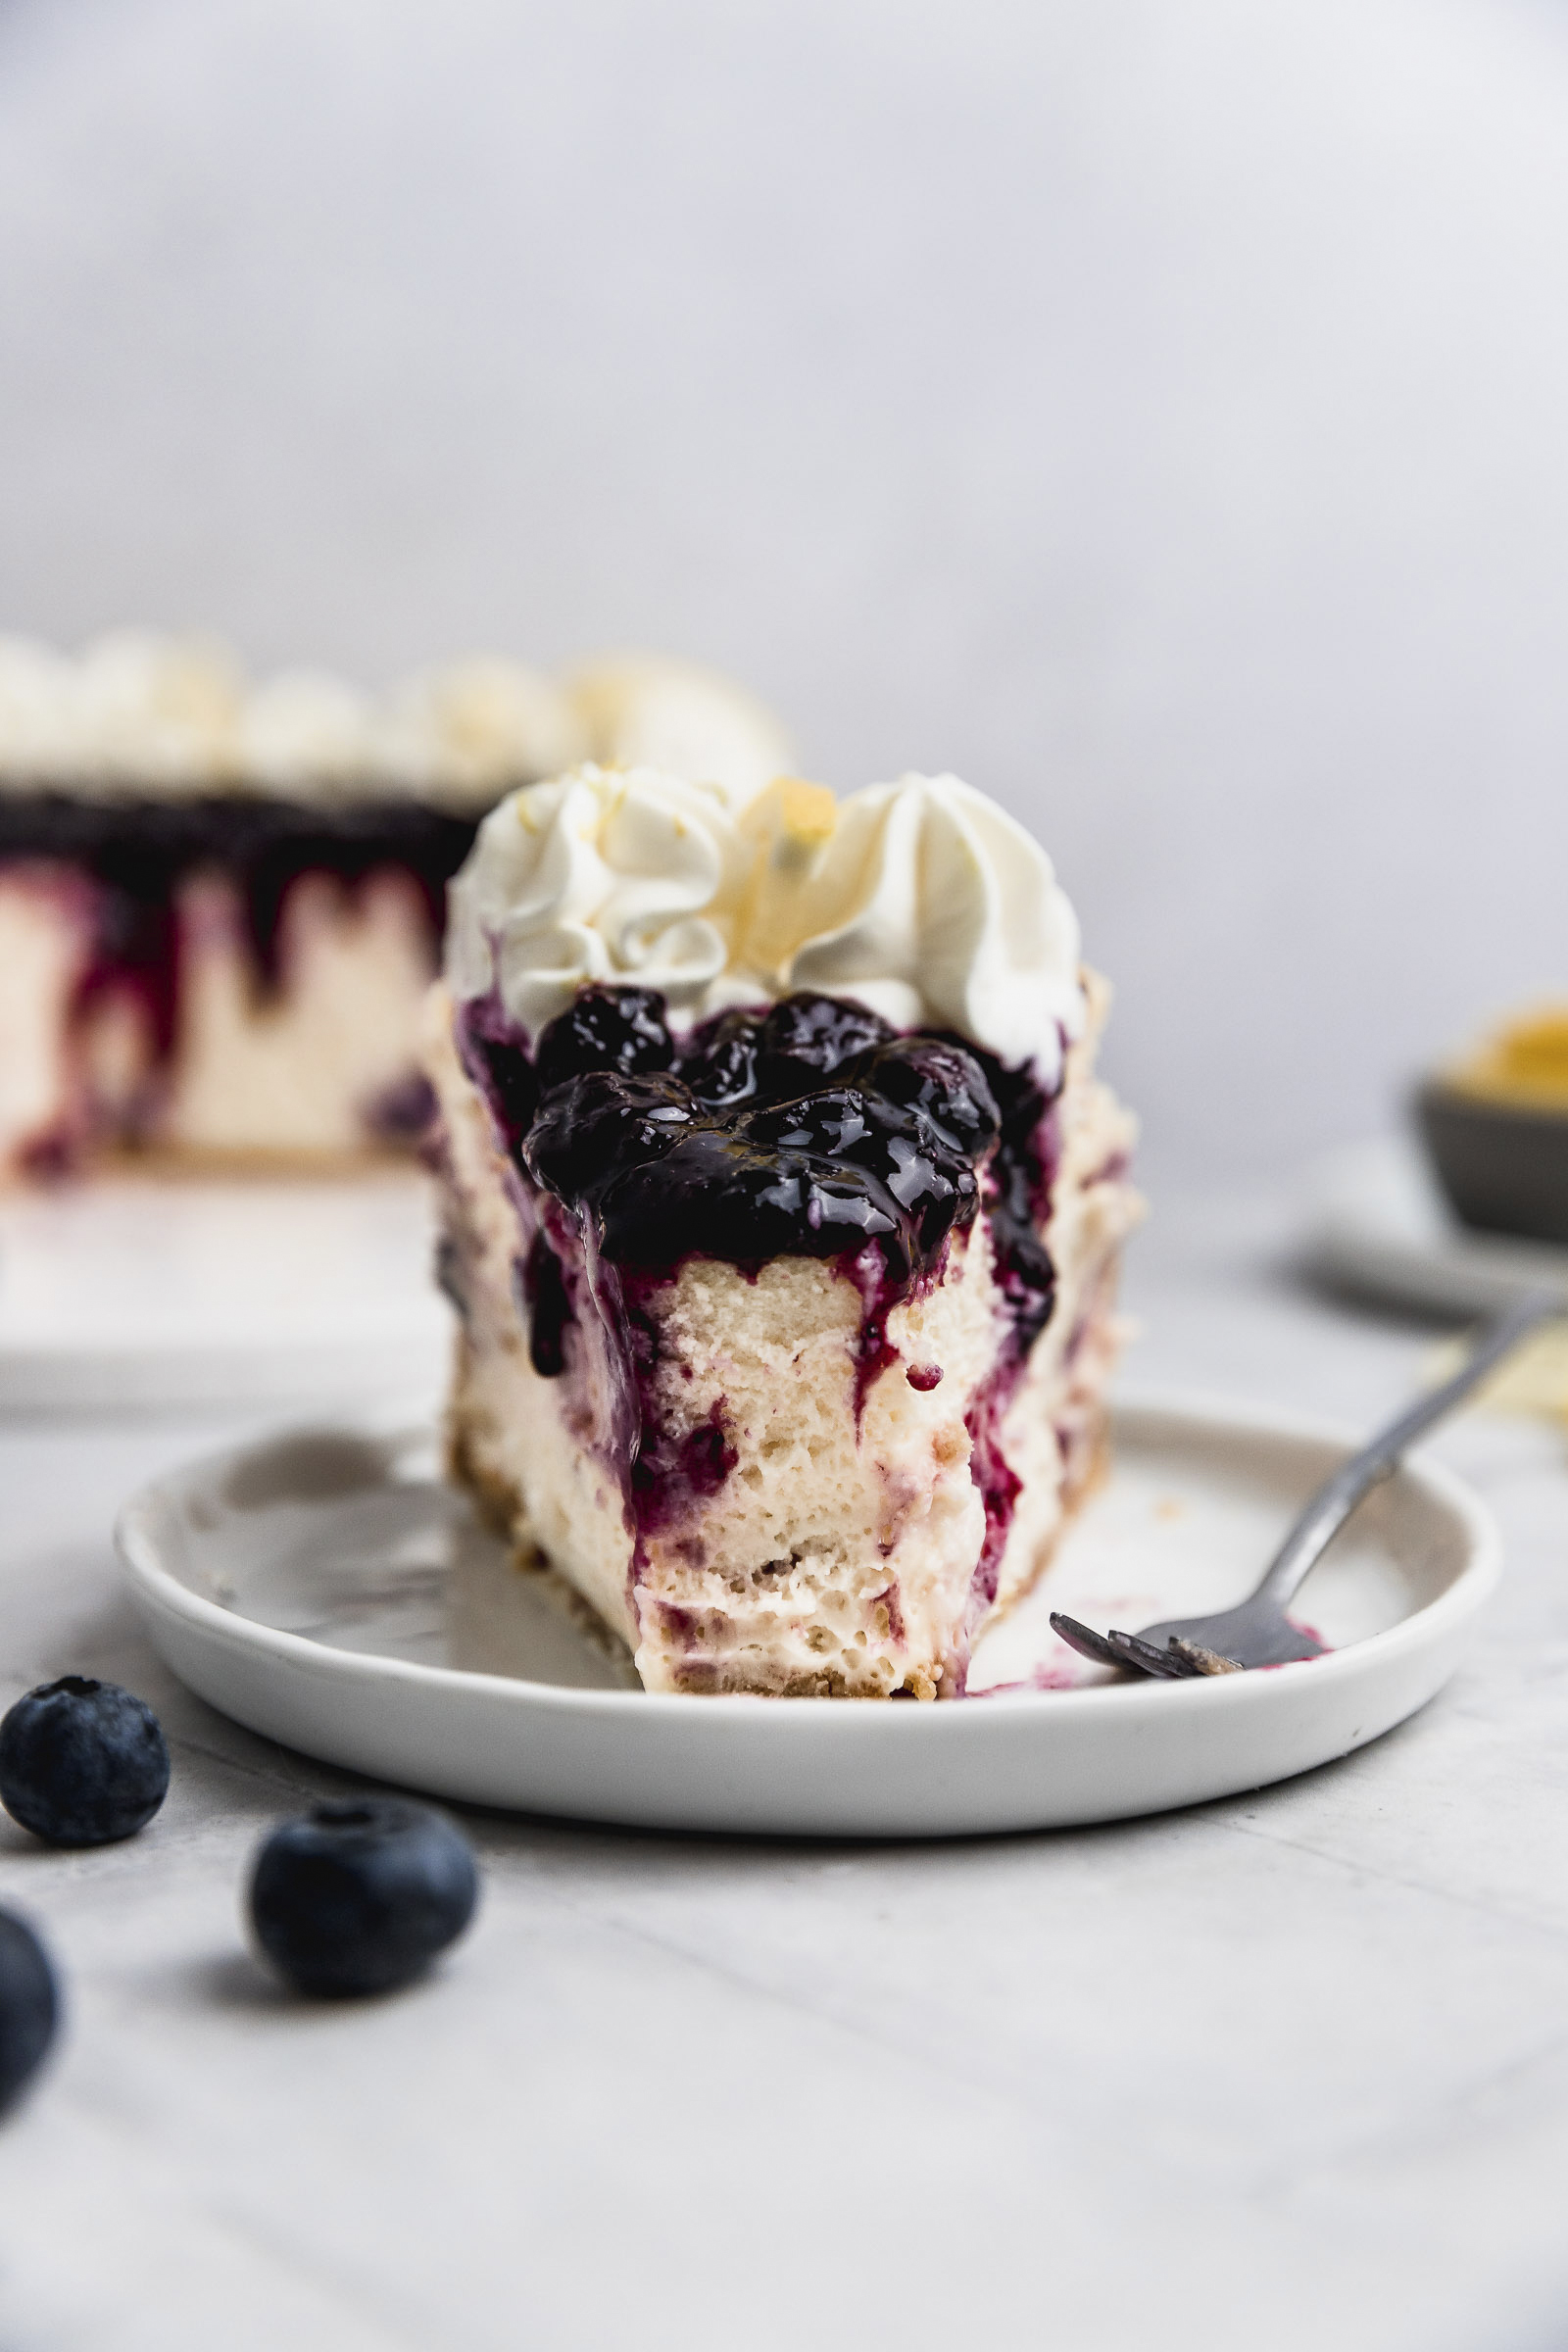 Frontal view of a lemon blueberry cheesecake slice. You can see the creamy texture and blueberry sauce on top. At the edge of the slice are rosettes of whipped cream.